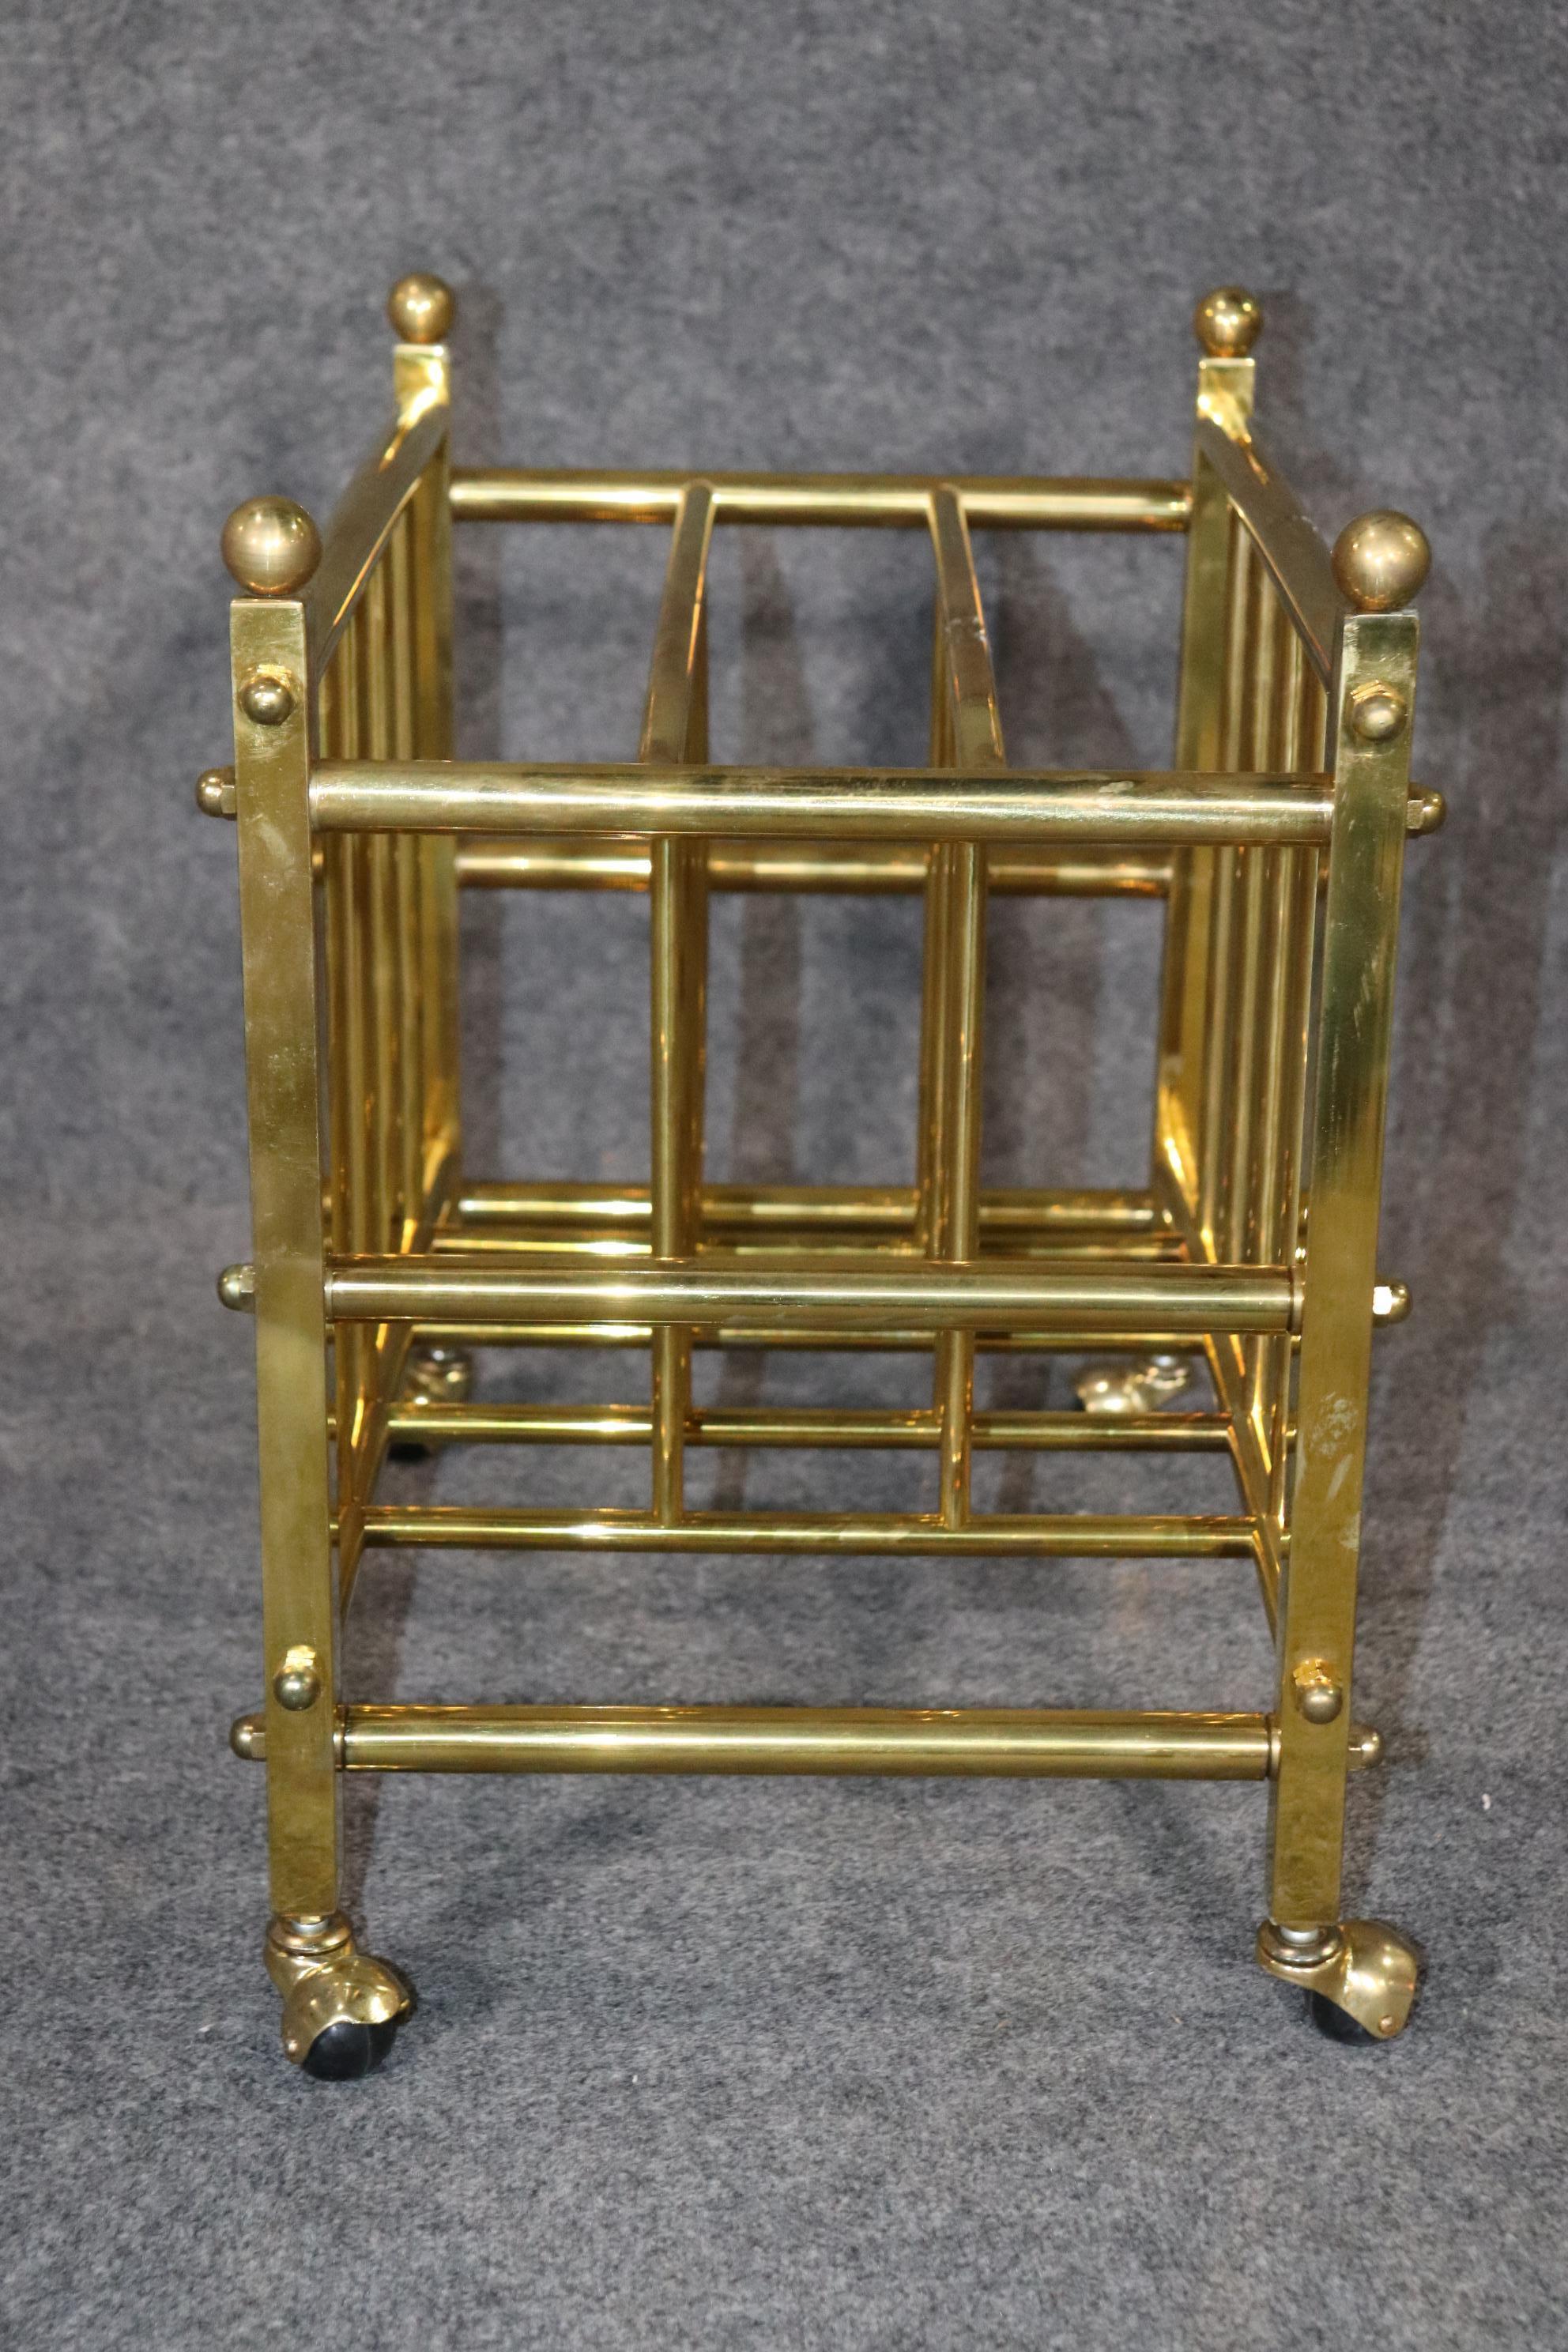 Fine Quality Maison Jansen Style Brass Magazine Rack Directoire Style In Good Condition For Sale In Swedesboro, NJ